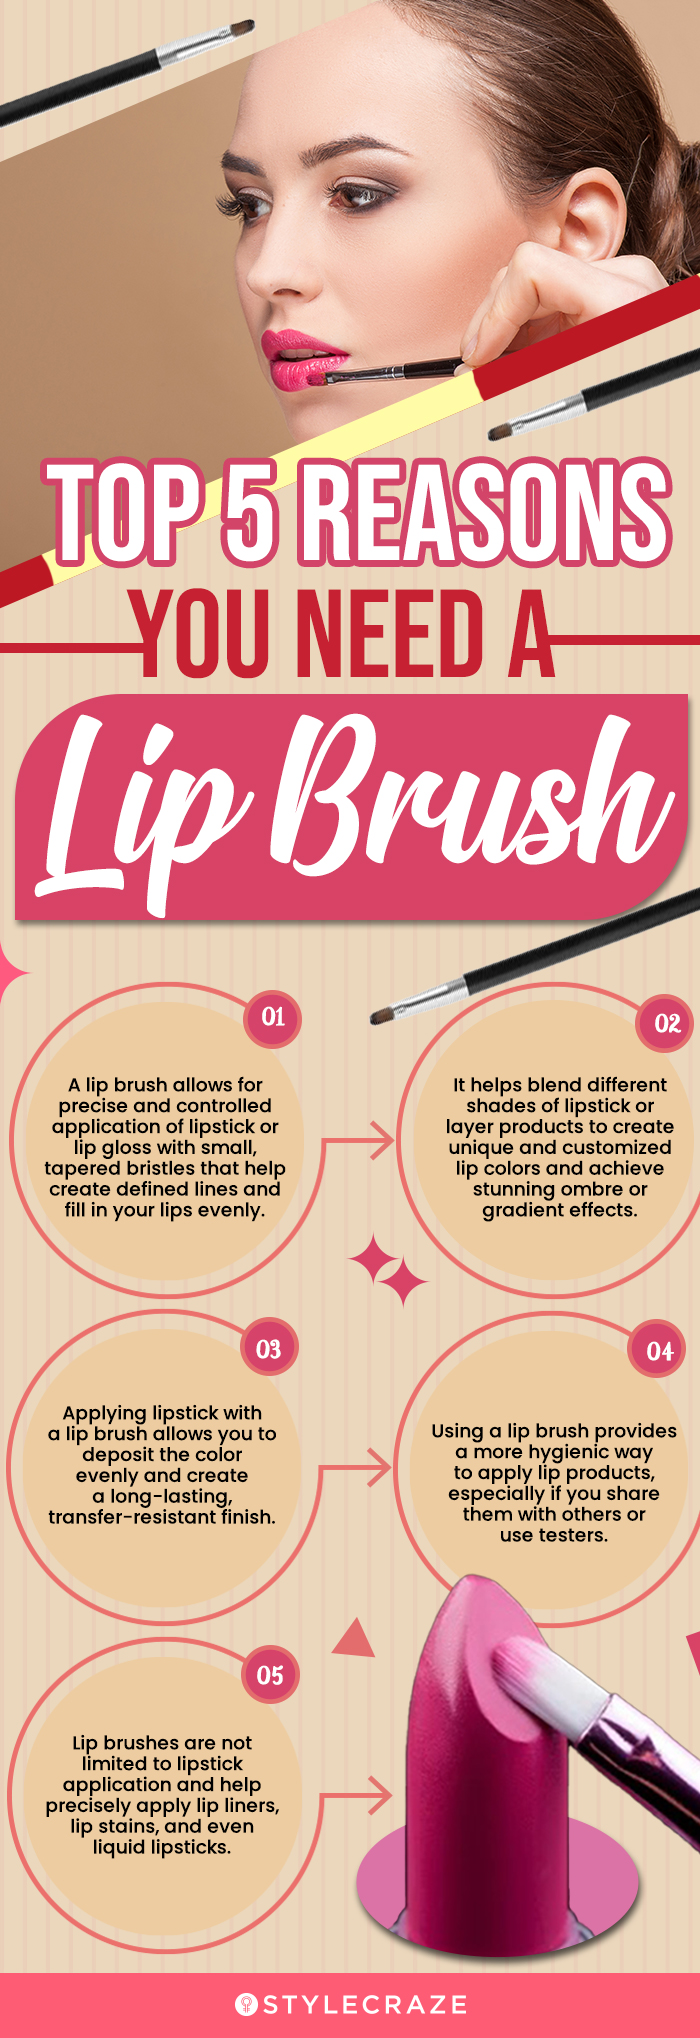 top 5 reasons you need a lip brush (infographic)